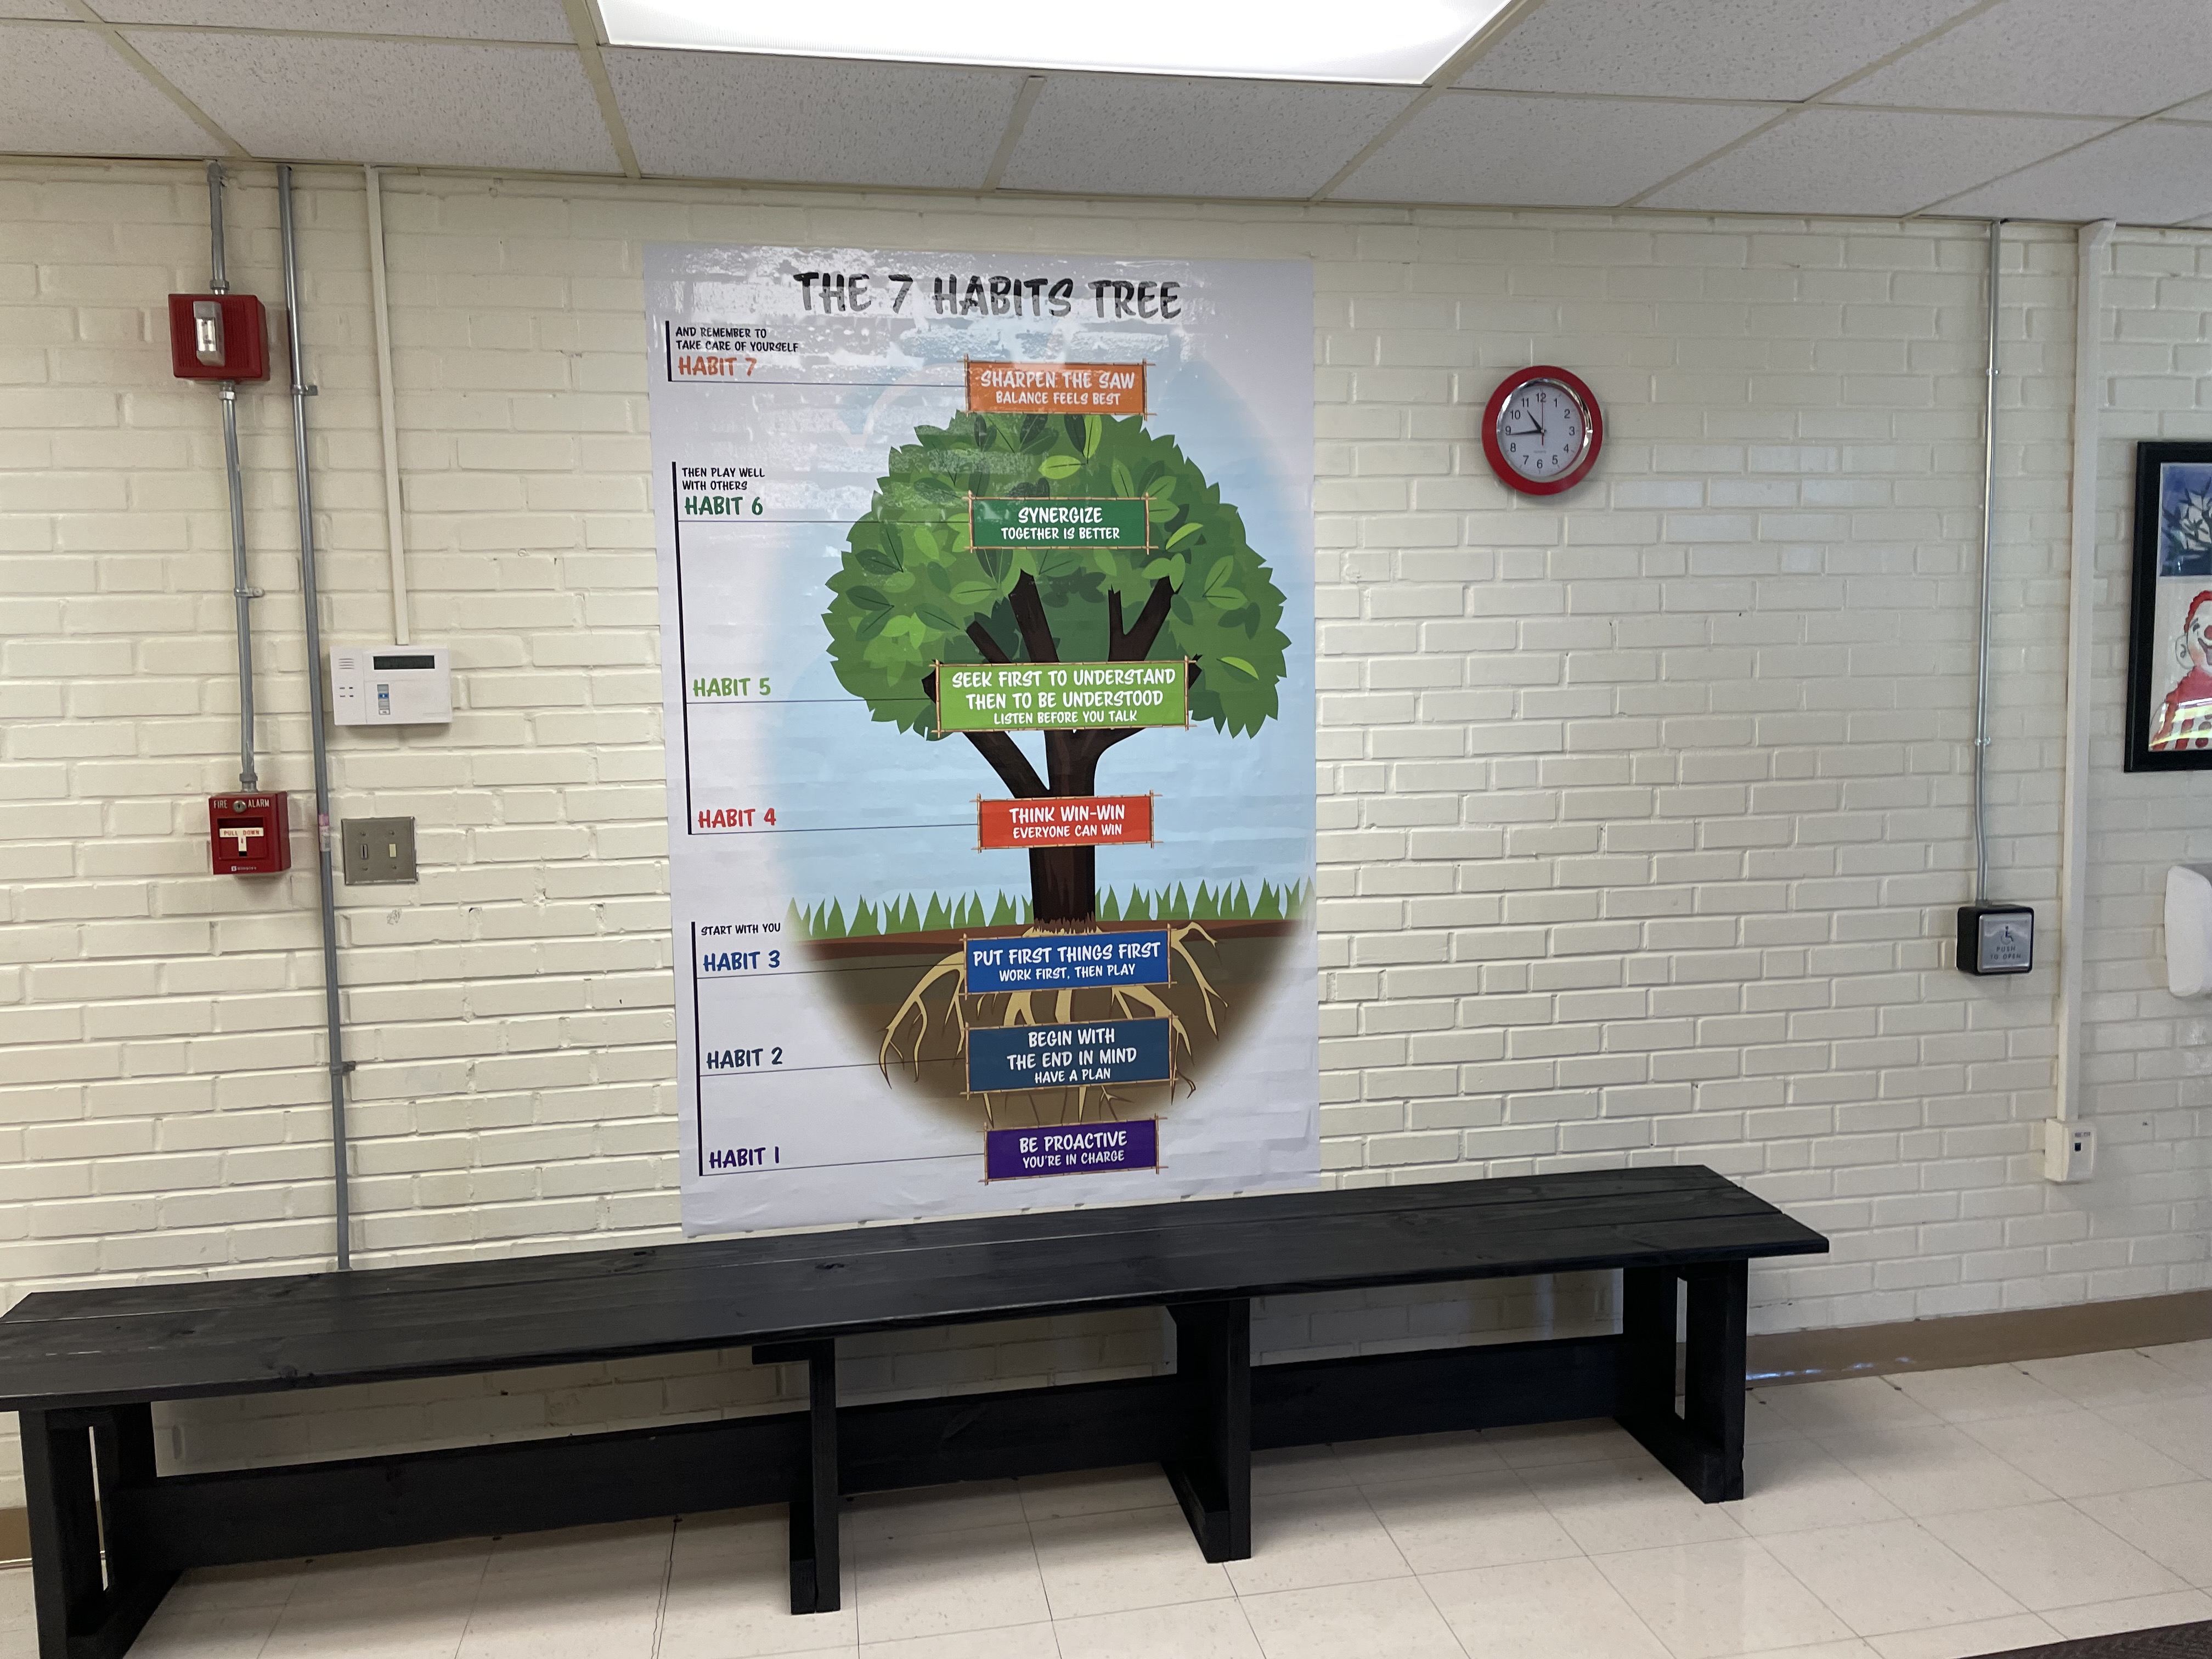 The Leader In Me 7 Habits Tree foyer display